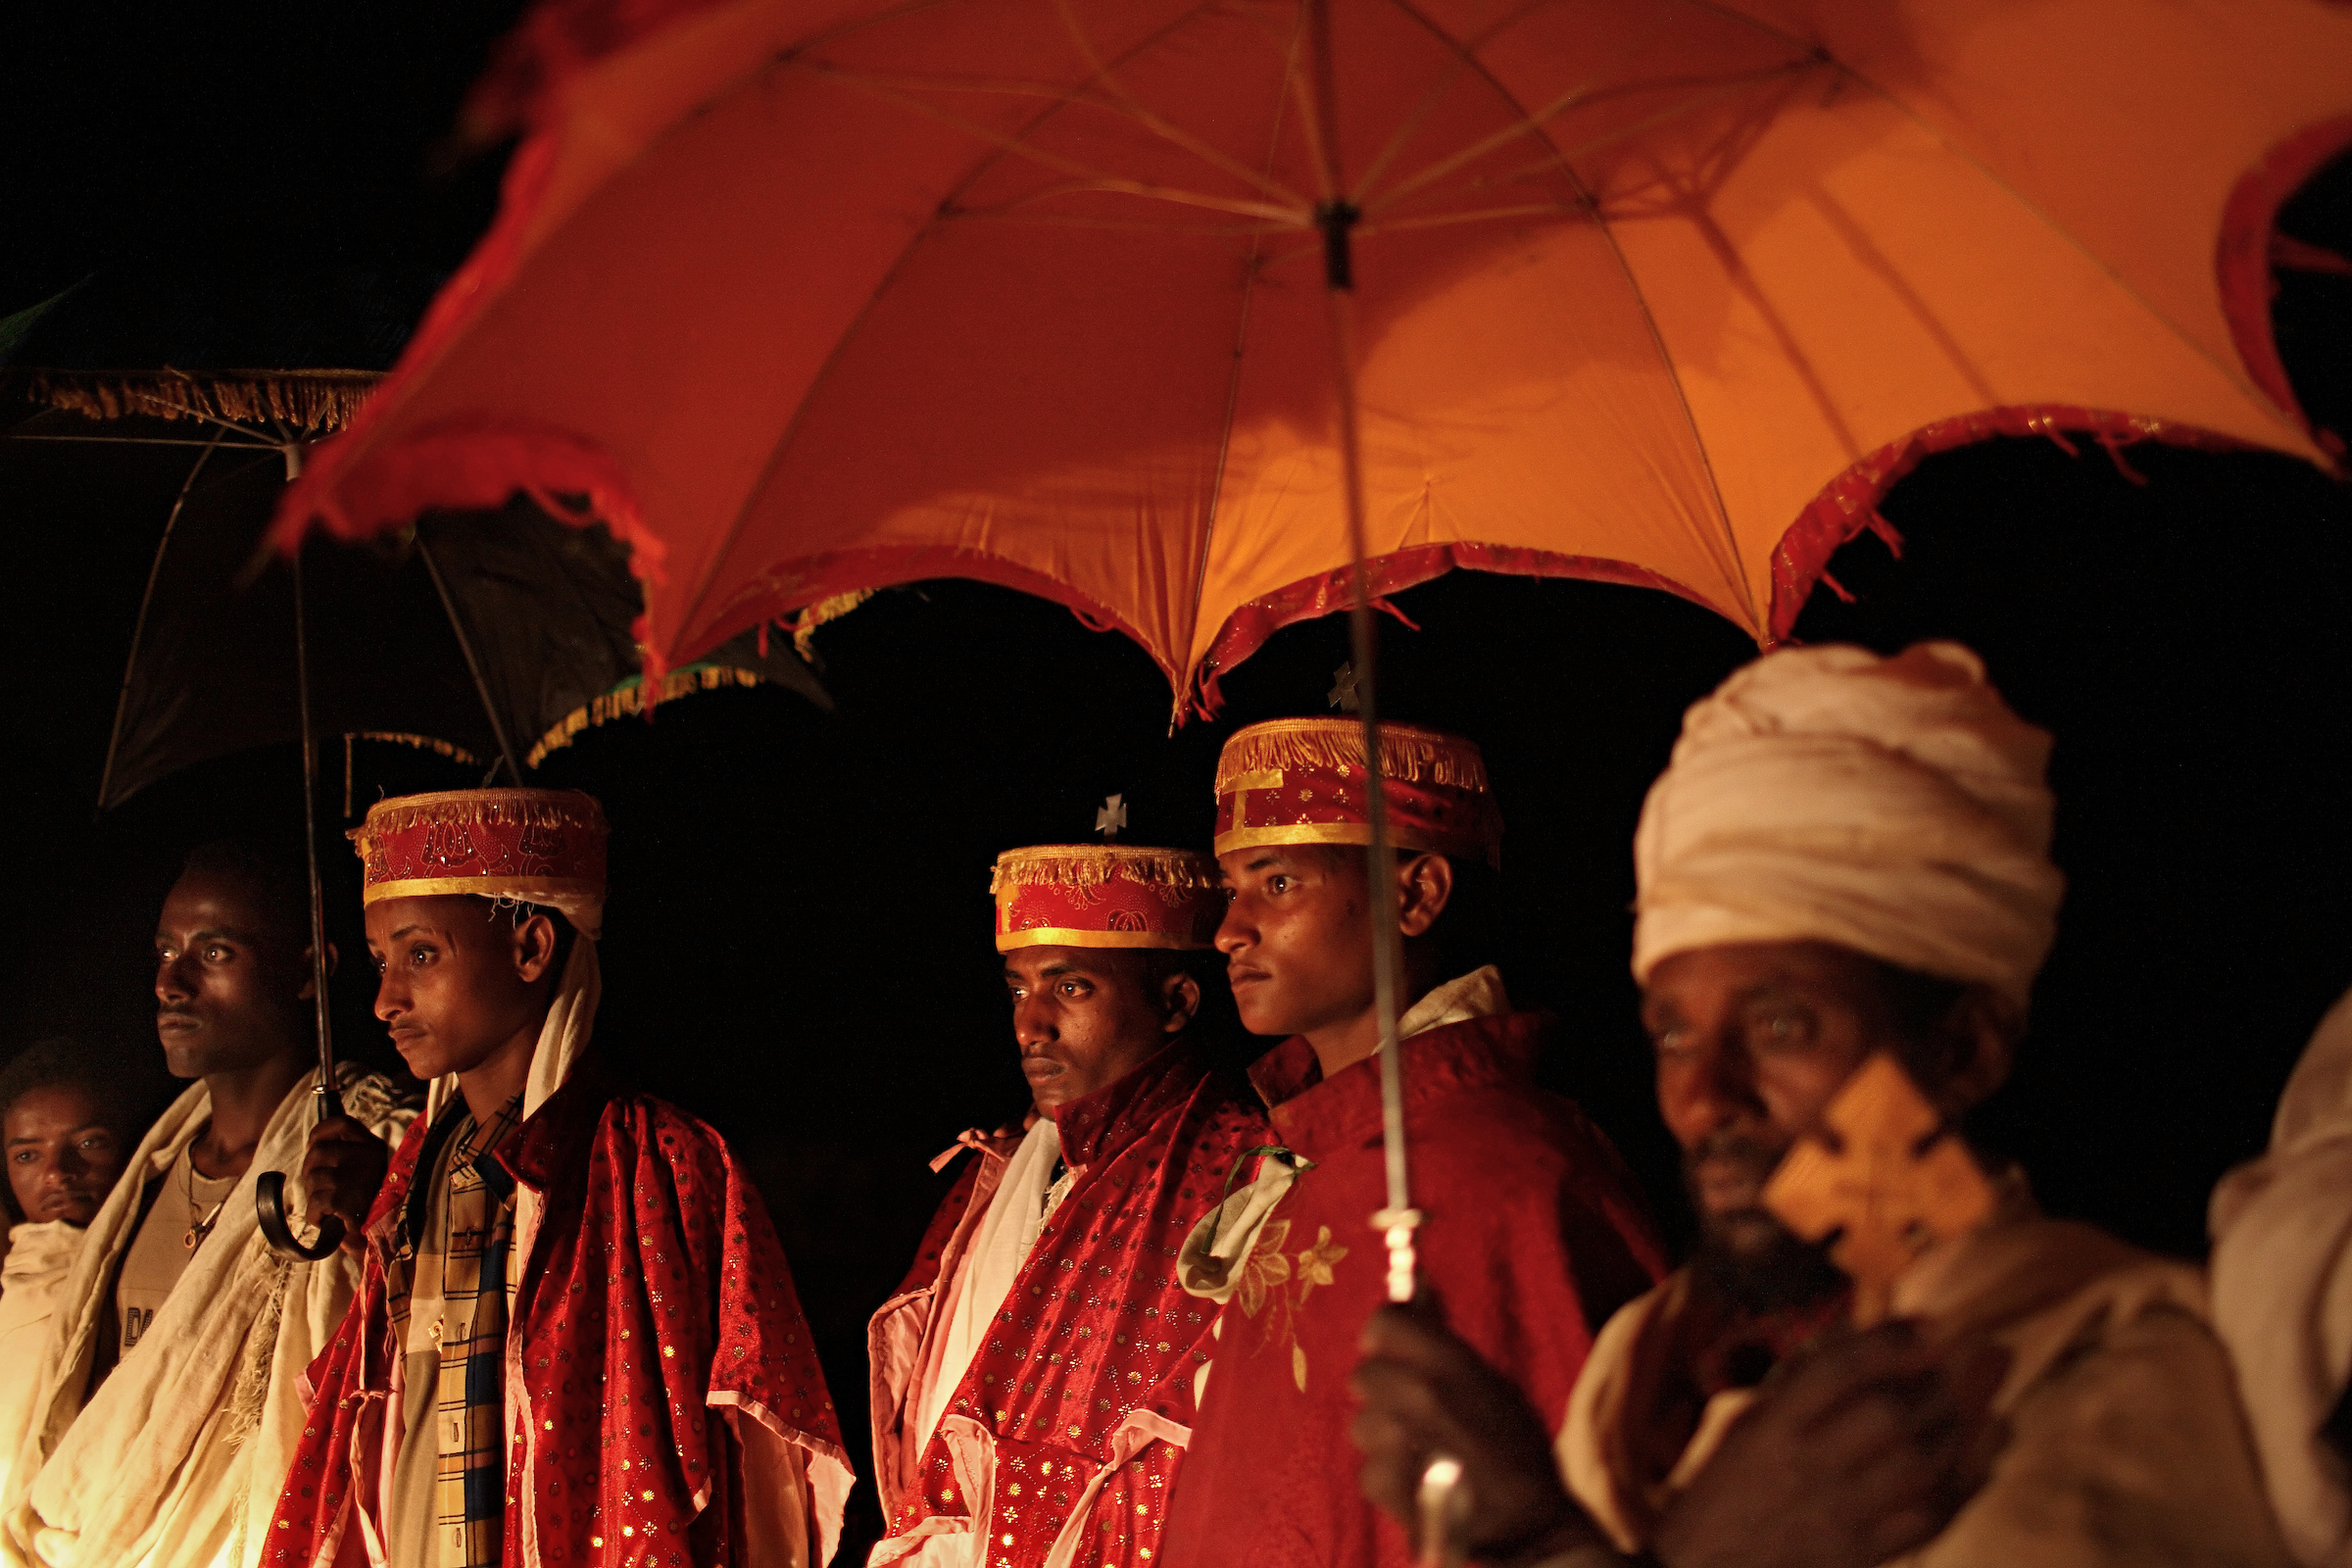 Dressed in traditional Ethiopian Orthodox robes, the wedding party of made up of local priests,including Addisu, 23, walk through the night to pick up his new bride Destaye, 11.